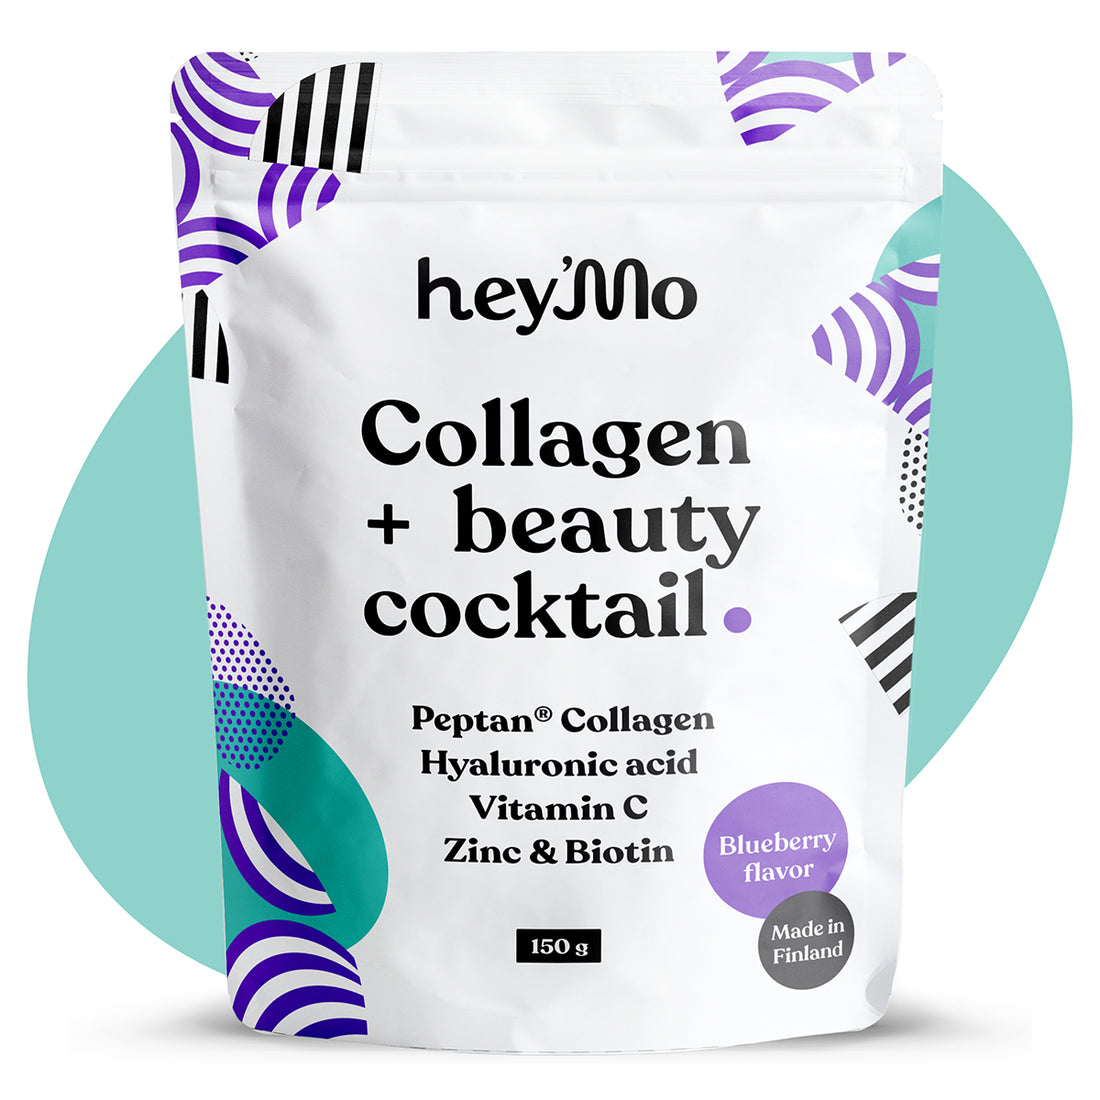 Collagen + beauty cocktail Blueberry